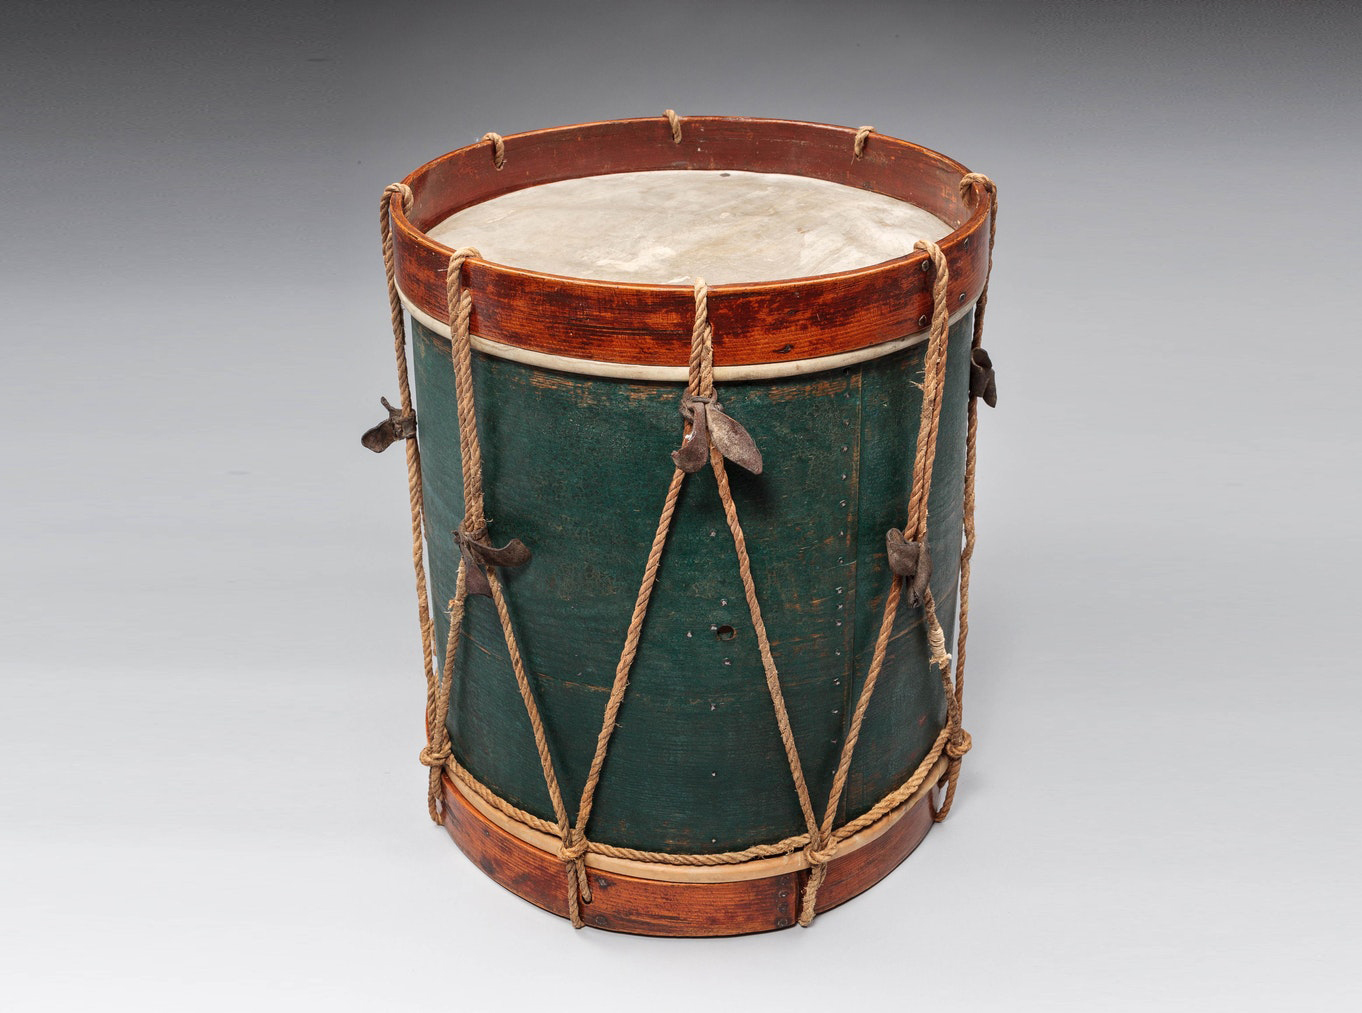 Stephen may have used a snare (or side) drum like this one.